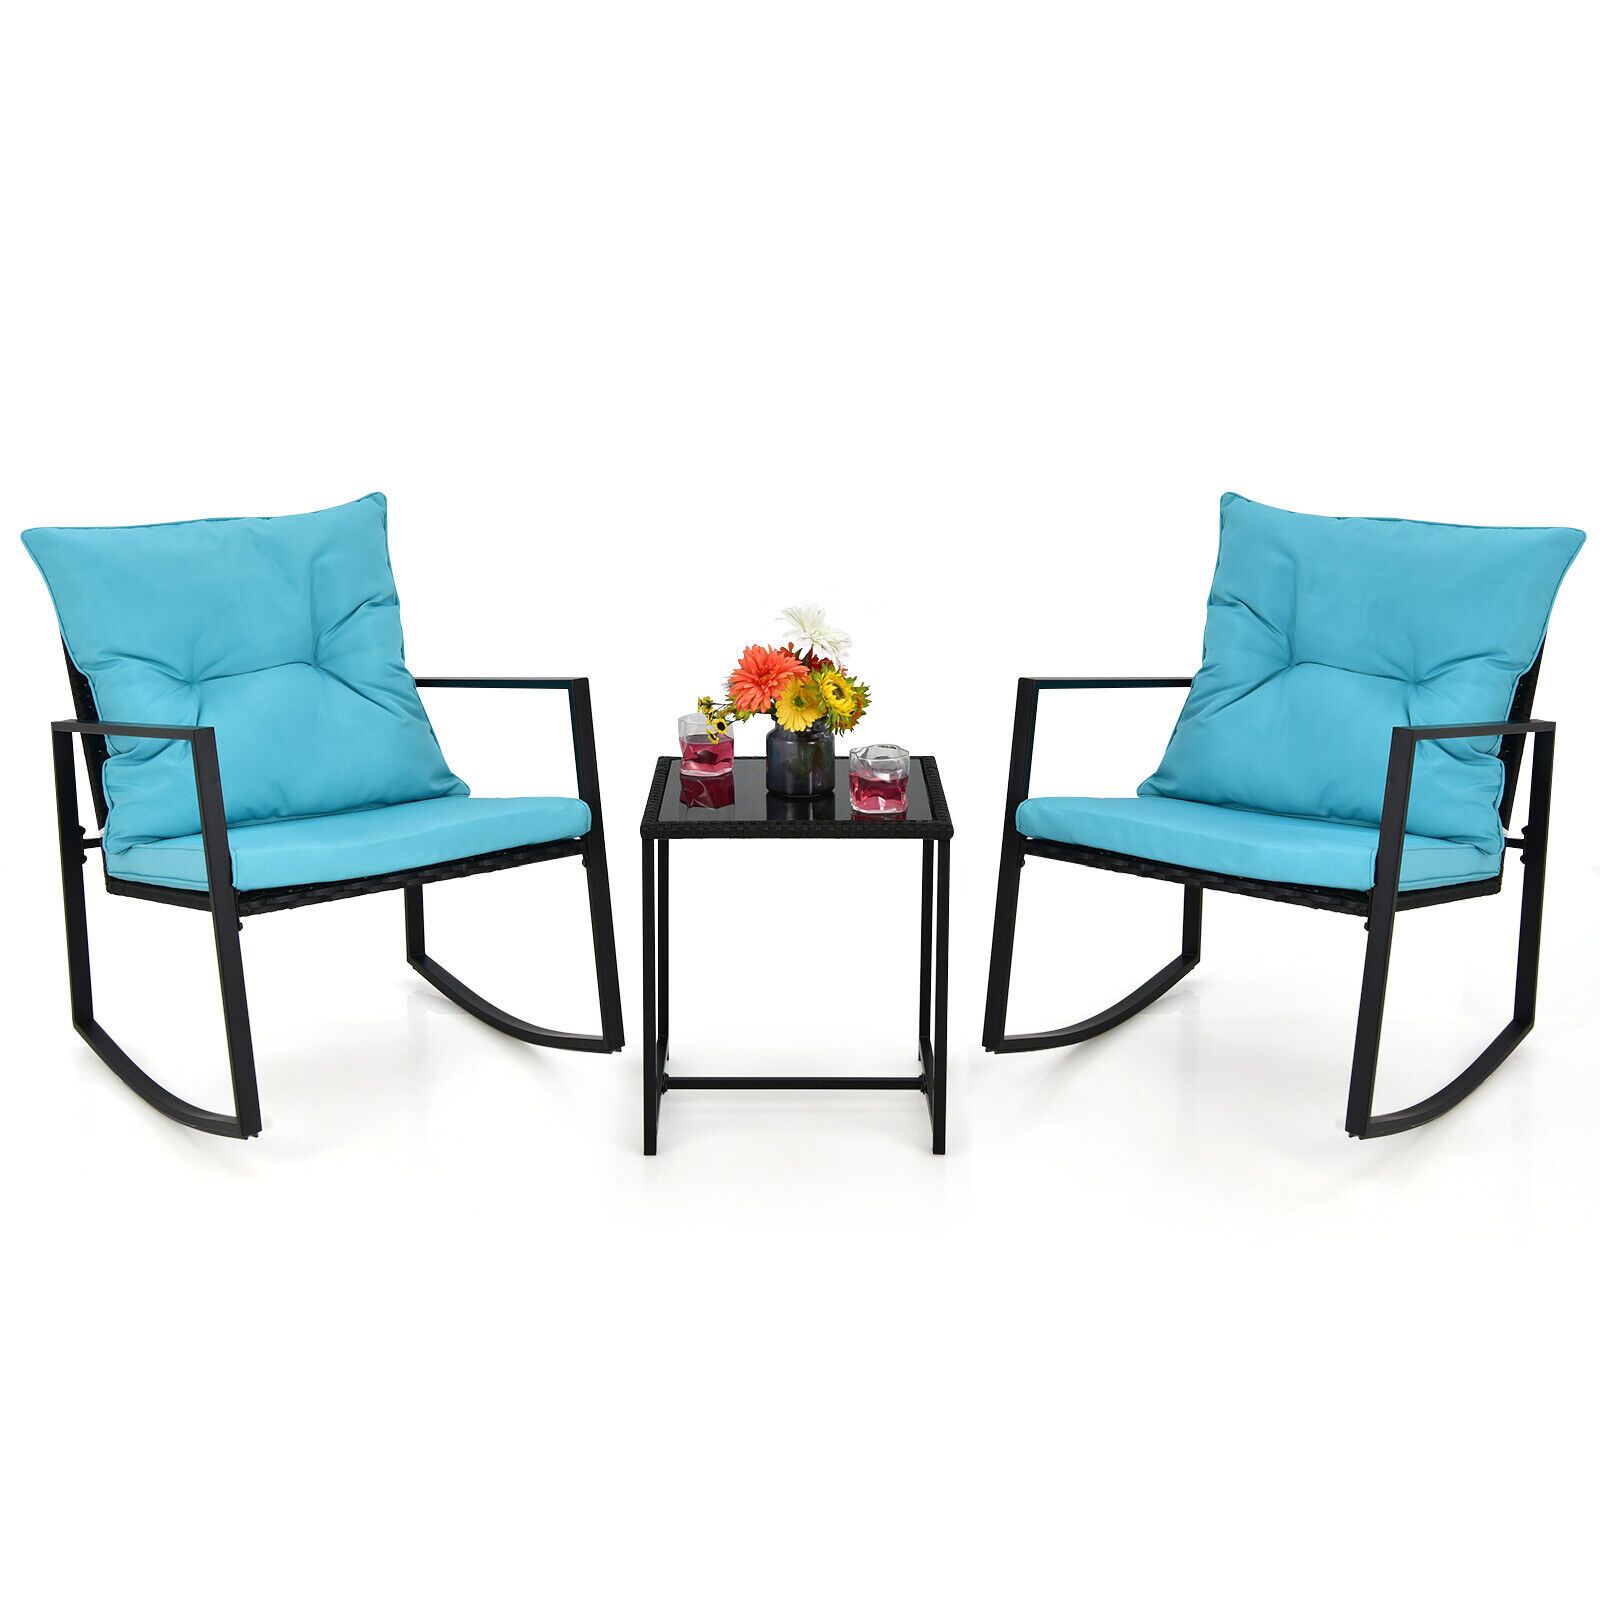 3 Pieces Rocking Chair and Glass Coffee Table Set